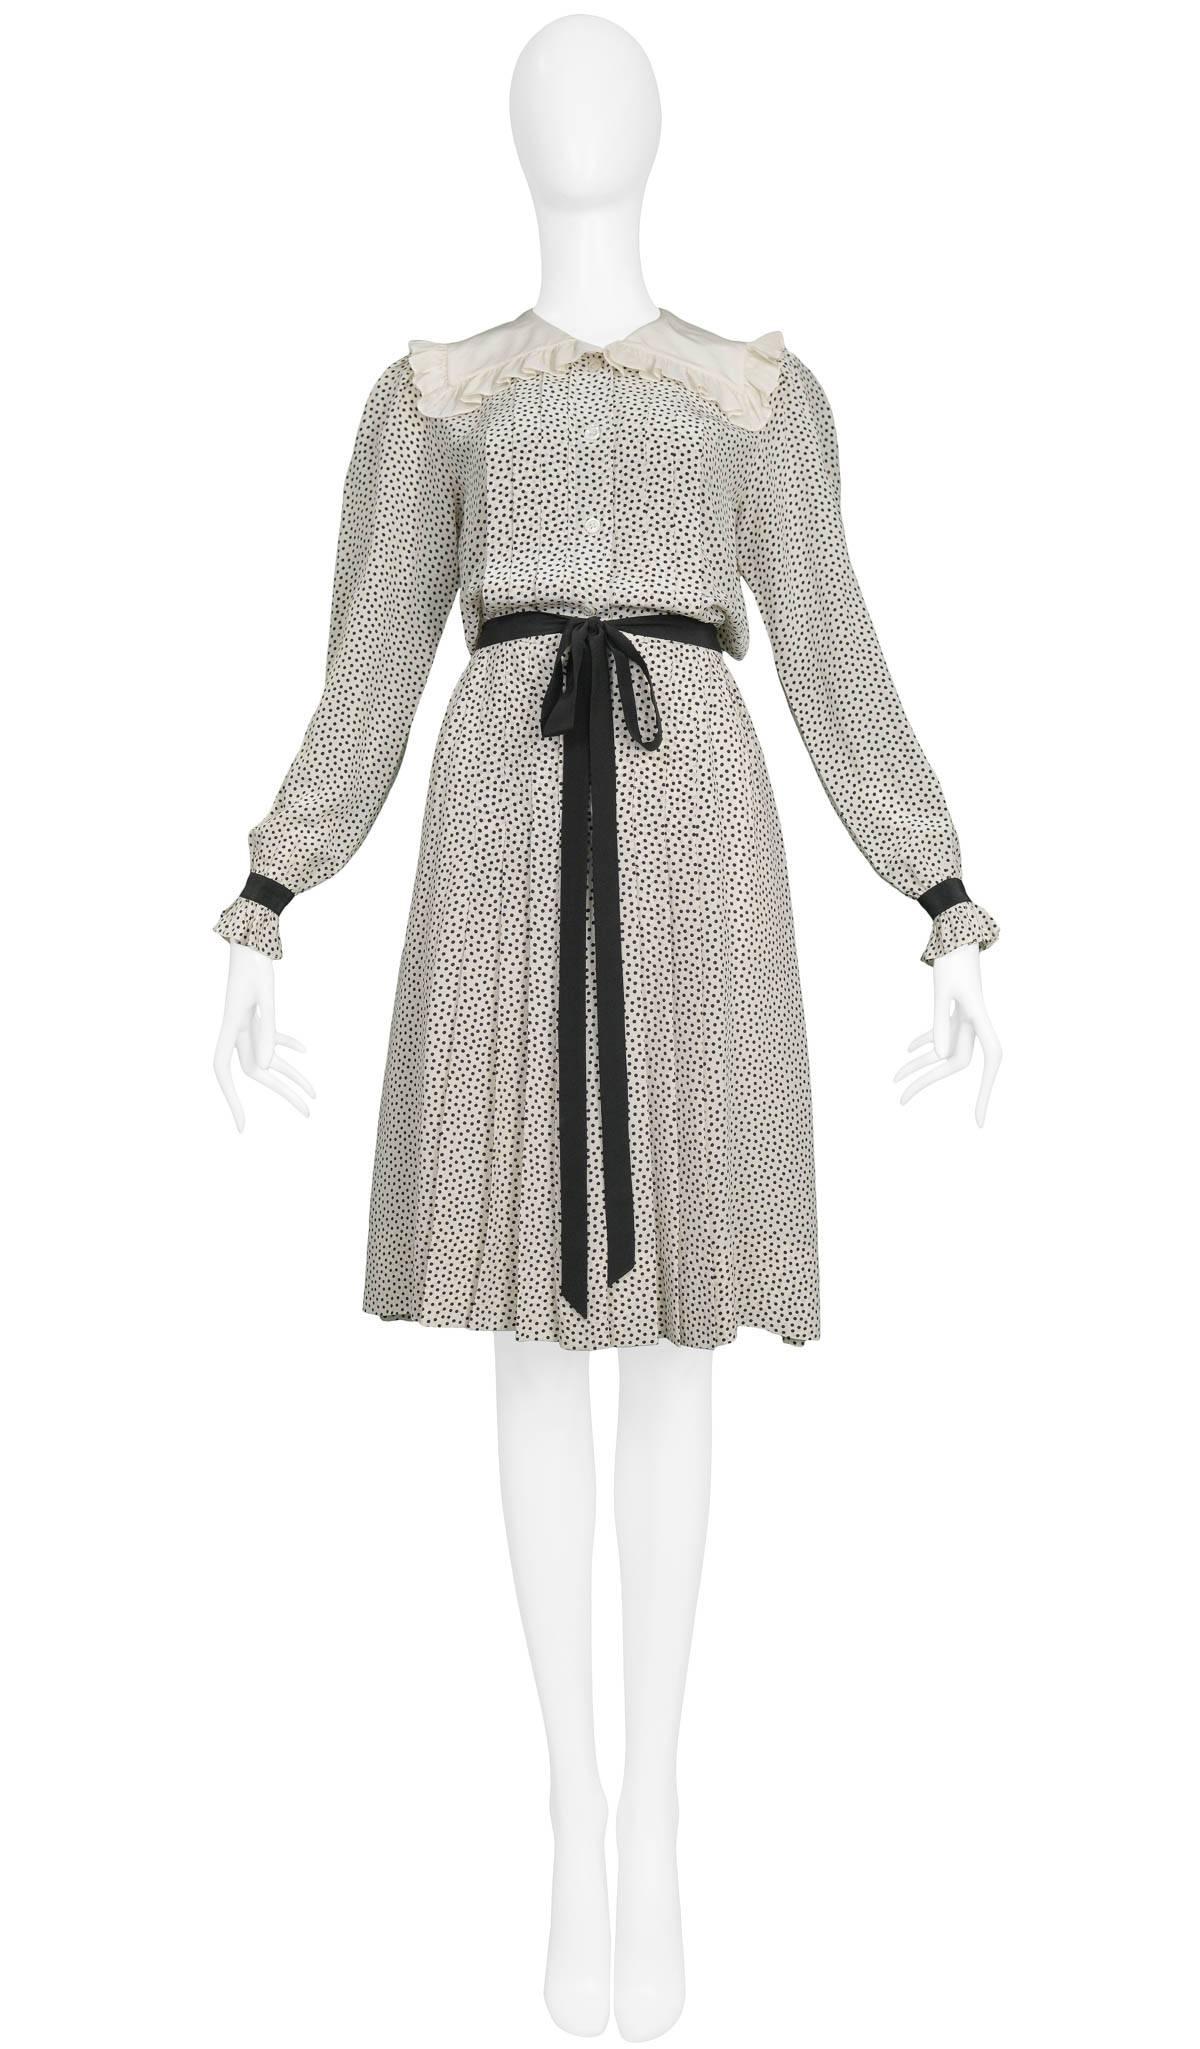 Vintage Yves Saint Laurent silk ivory pleated day dress with allover dot print, ruffle collar, and ribbon tie at waist and wrists. Circa 1970s. 

Excellent Condition.

Size: FR 34
